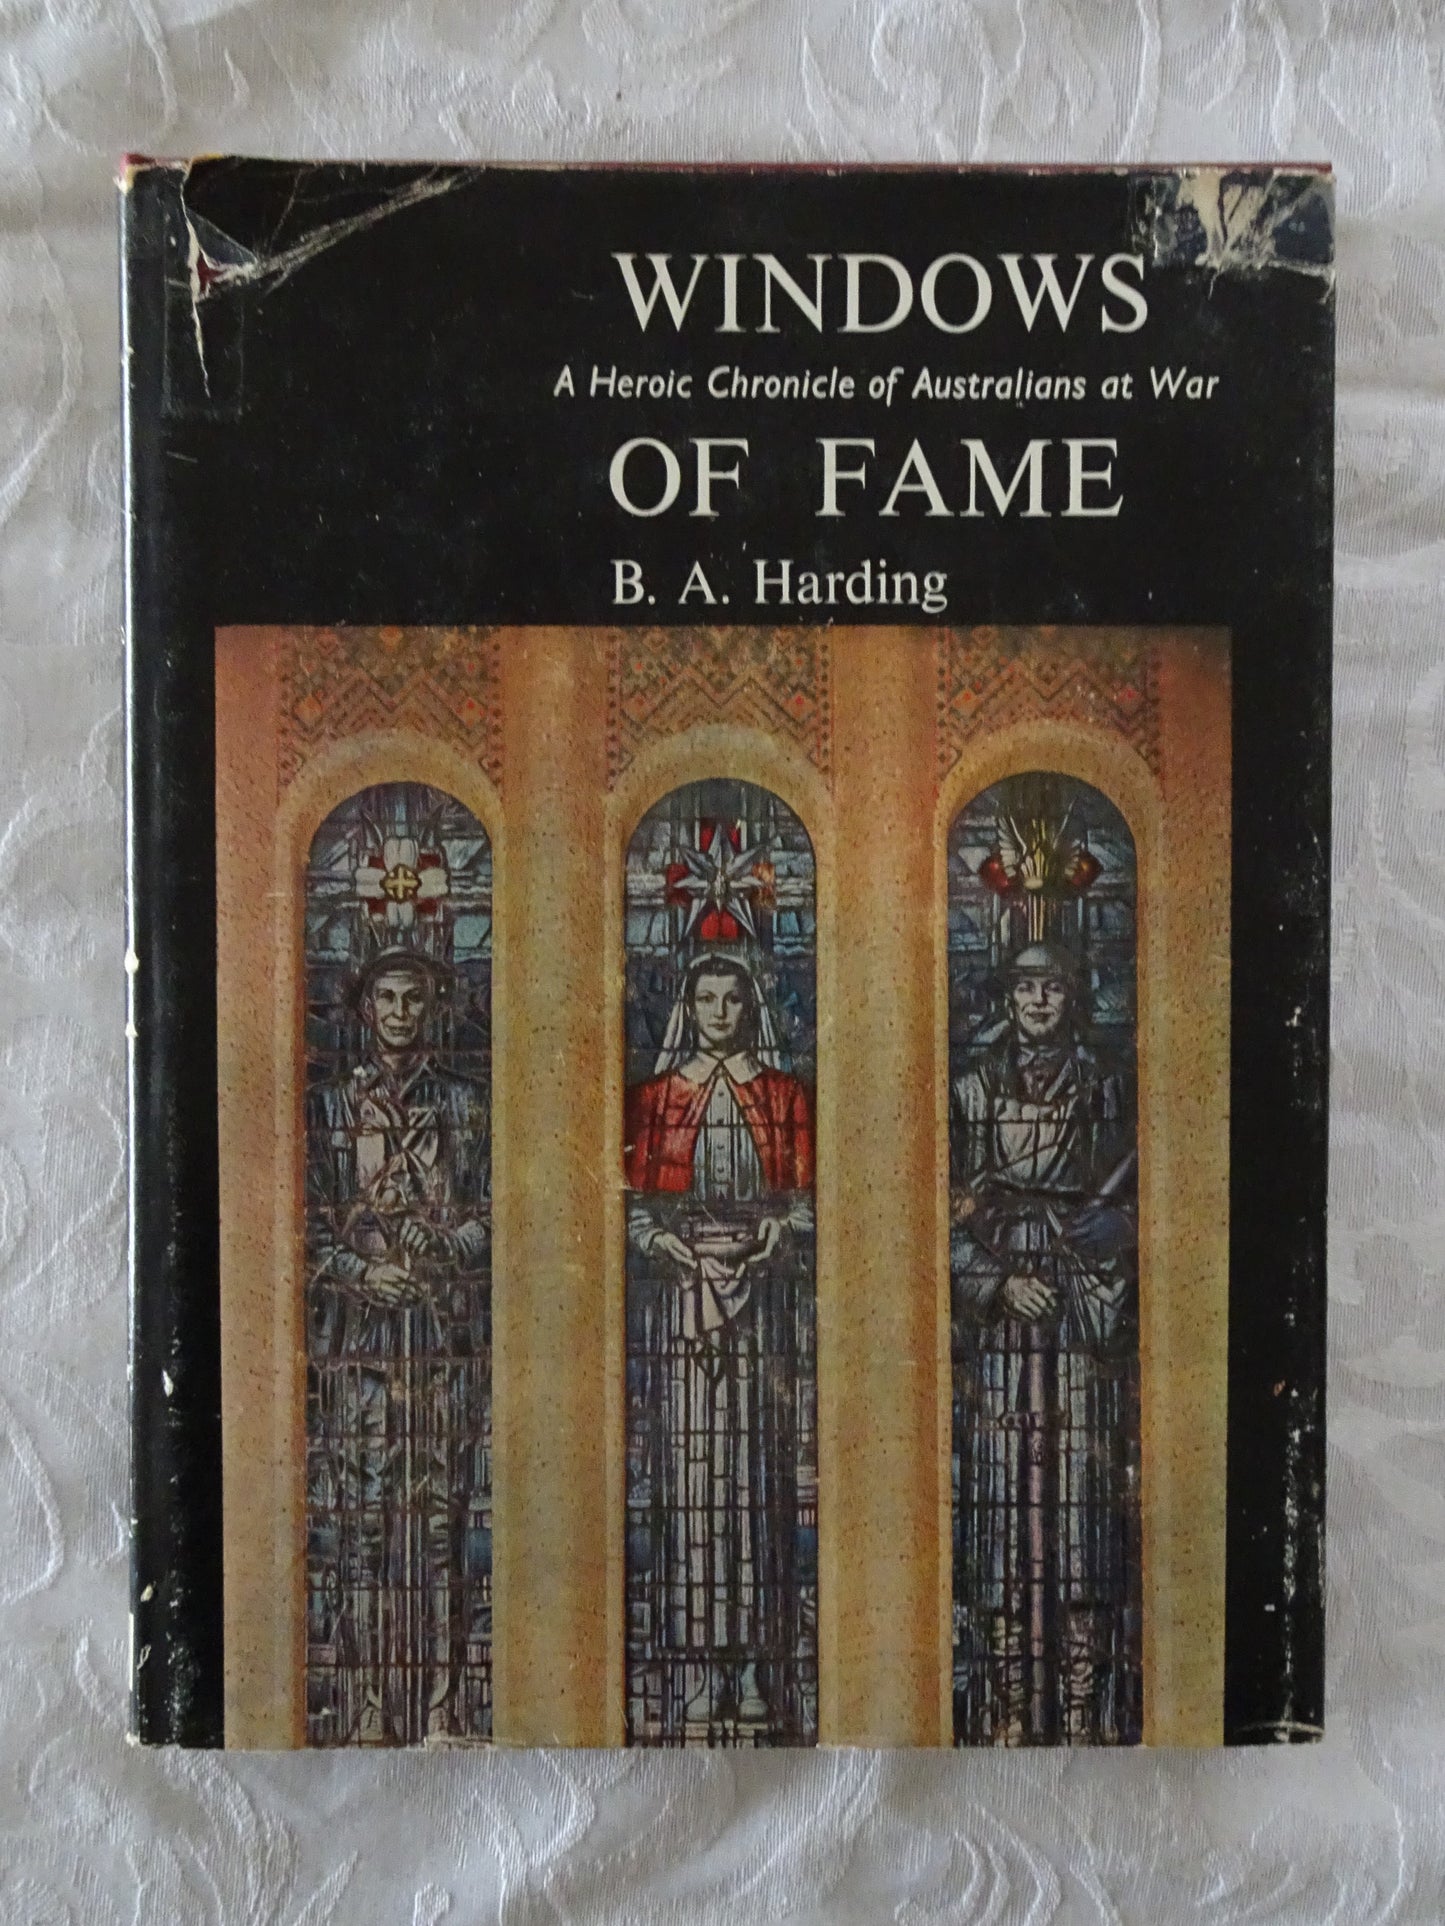 Windows of Fame by B. A. Harding